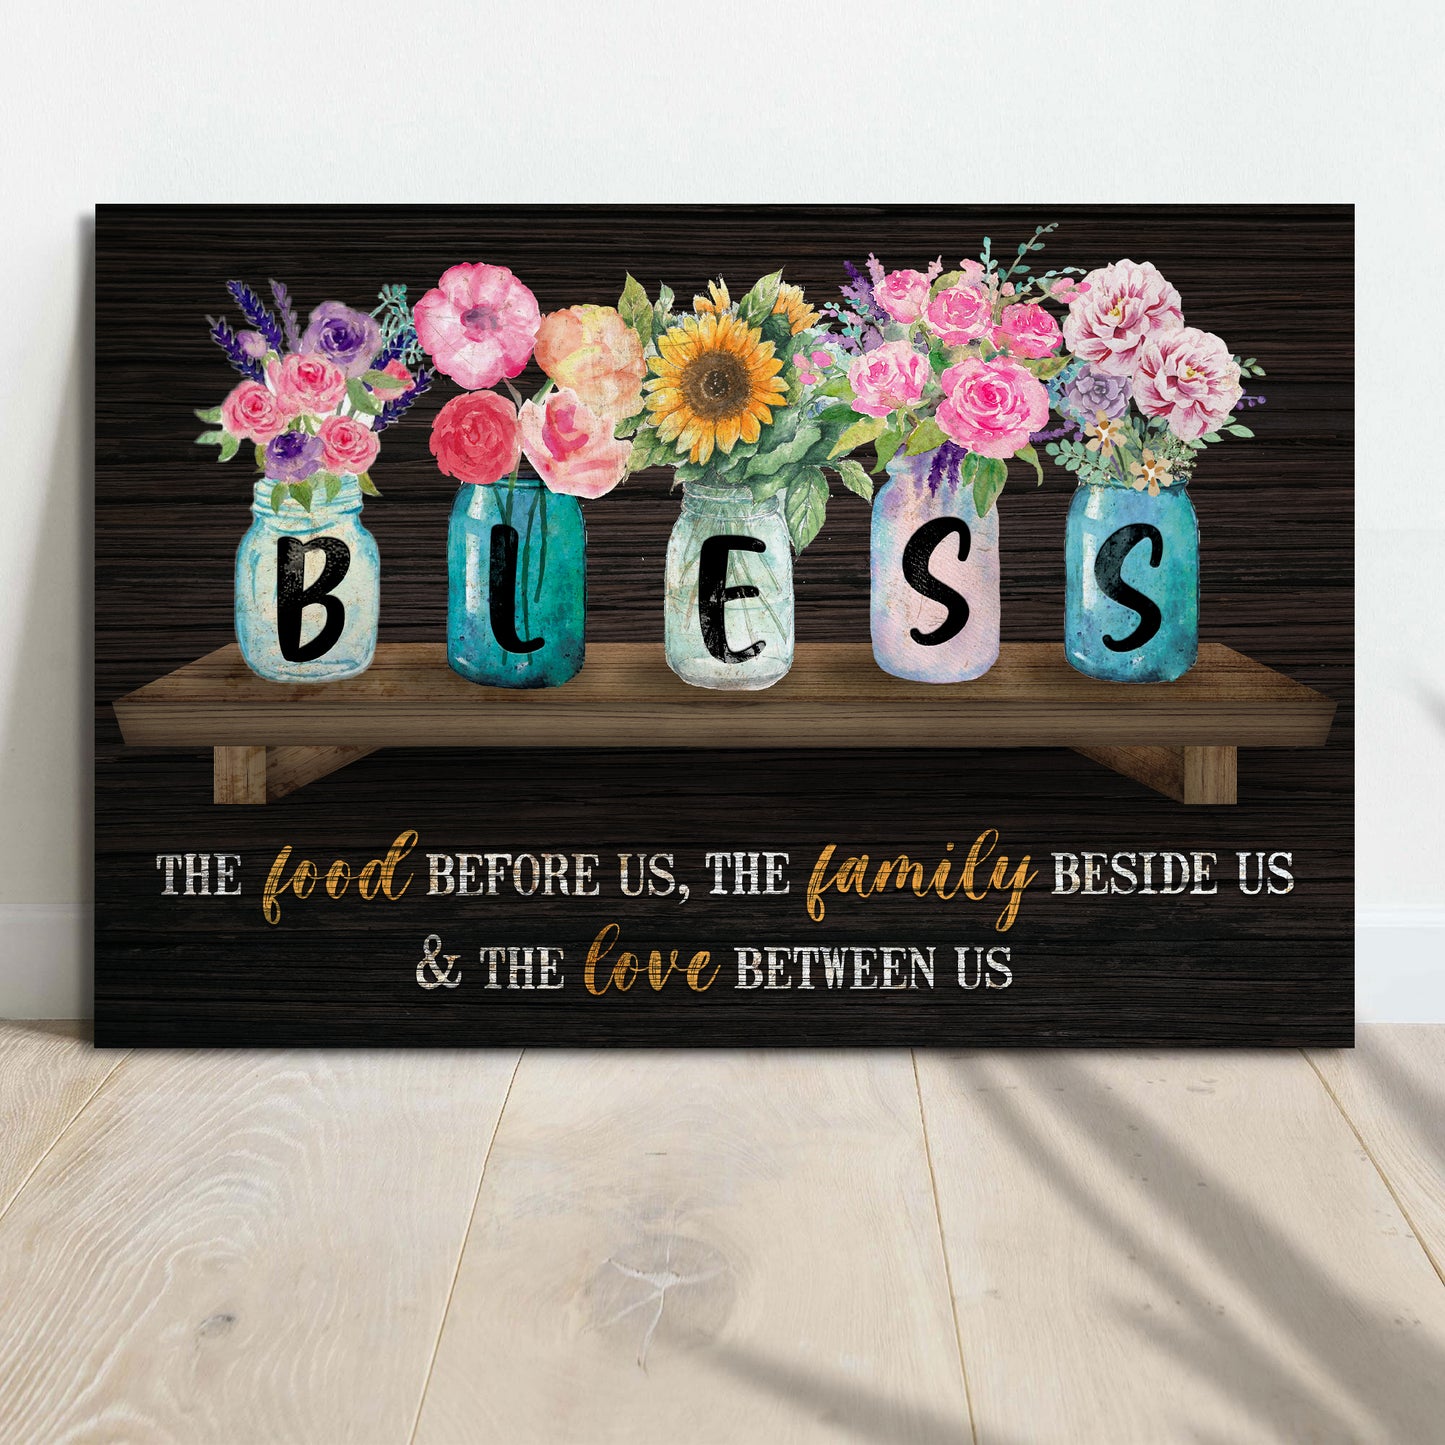 Bless the Food, the family, and the love between us (Ready to hang) - Wall Art Image by Tailored Canvases